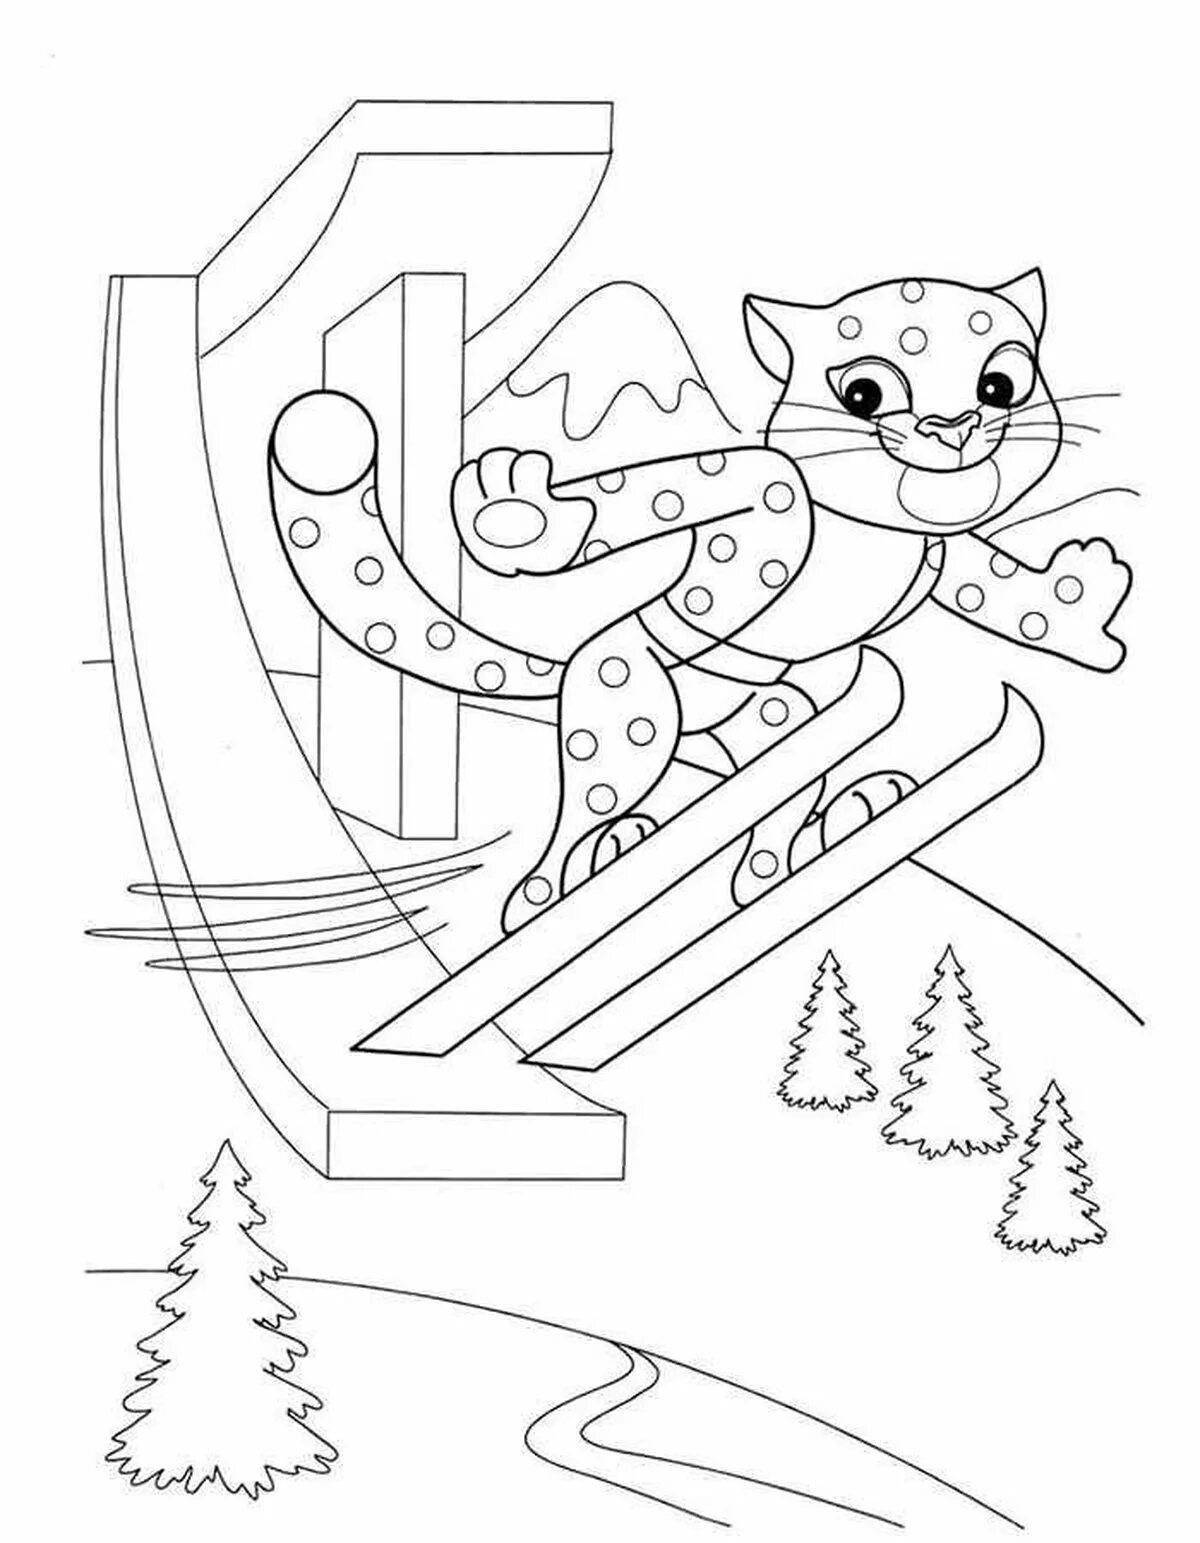 Dynamic coloring for children's olympic sports